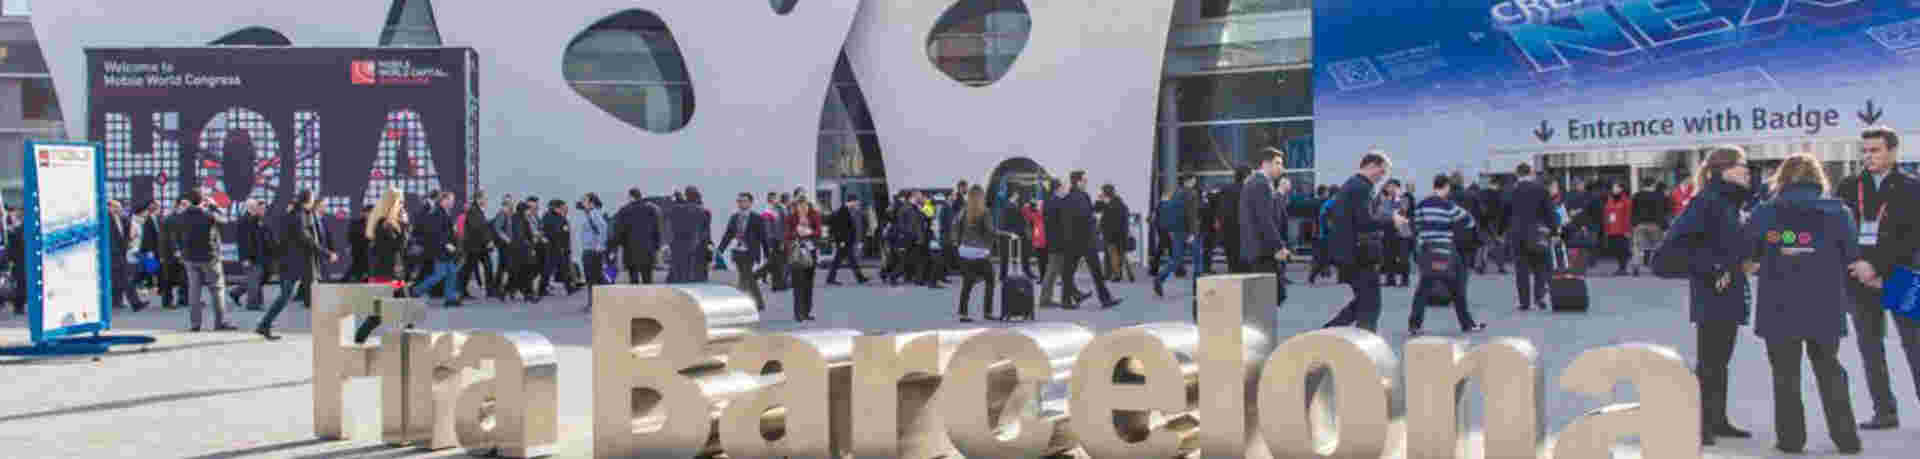 14 Colombian companies at GSMA Mobile World Congress 2015 